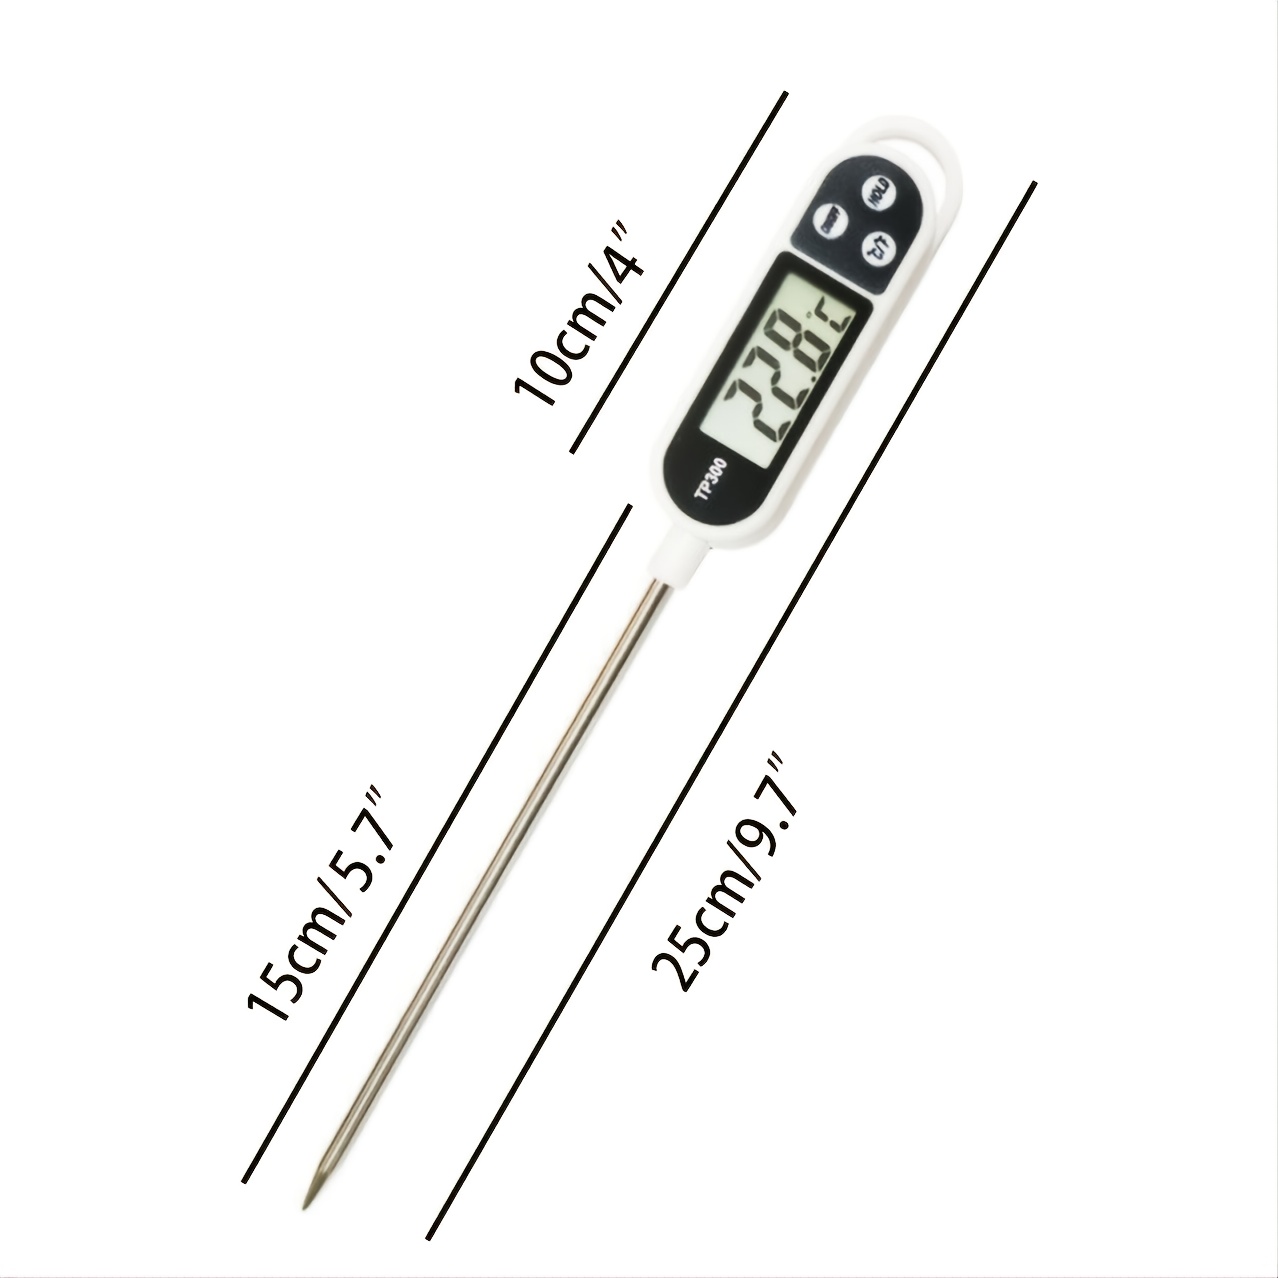 Digital Thermometer with 15cm Long Probe Candle Making Kits